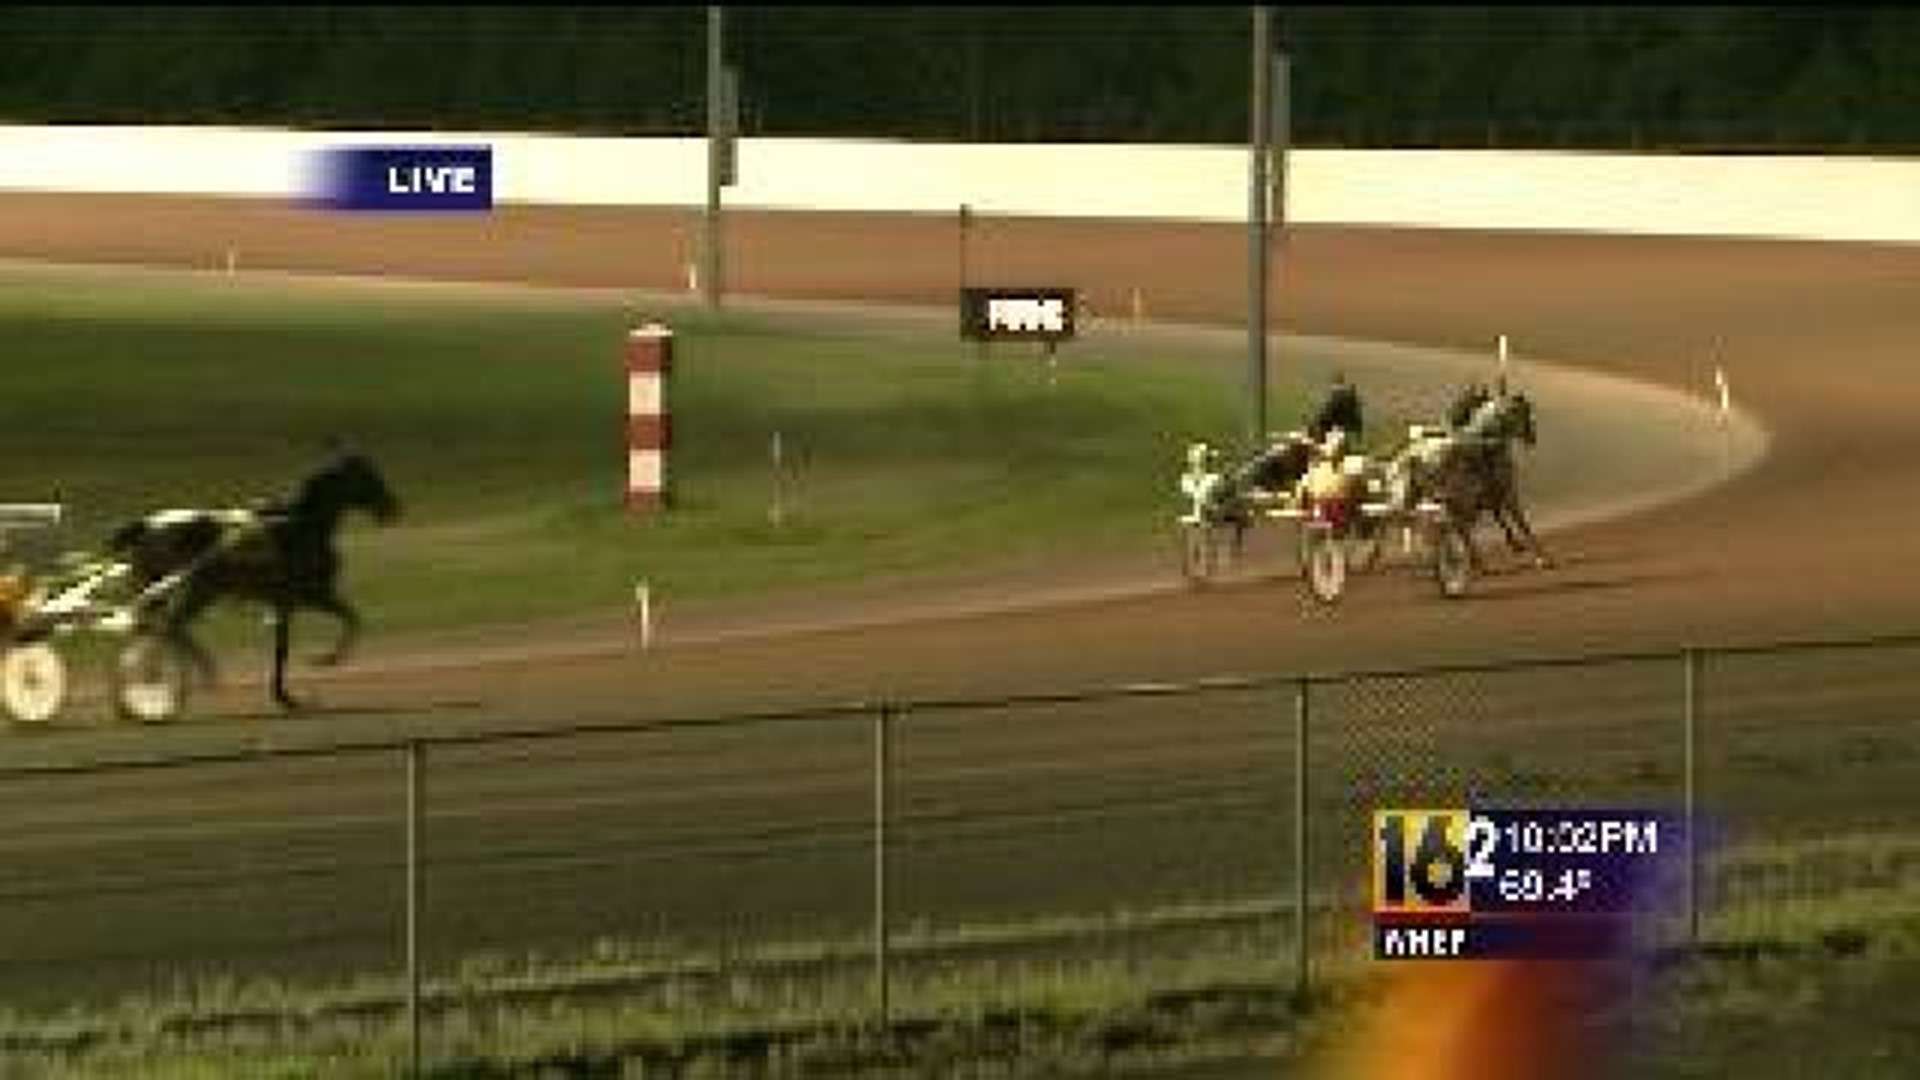 Local Track Reacts: No Triple Crown Winner